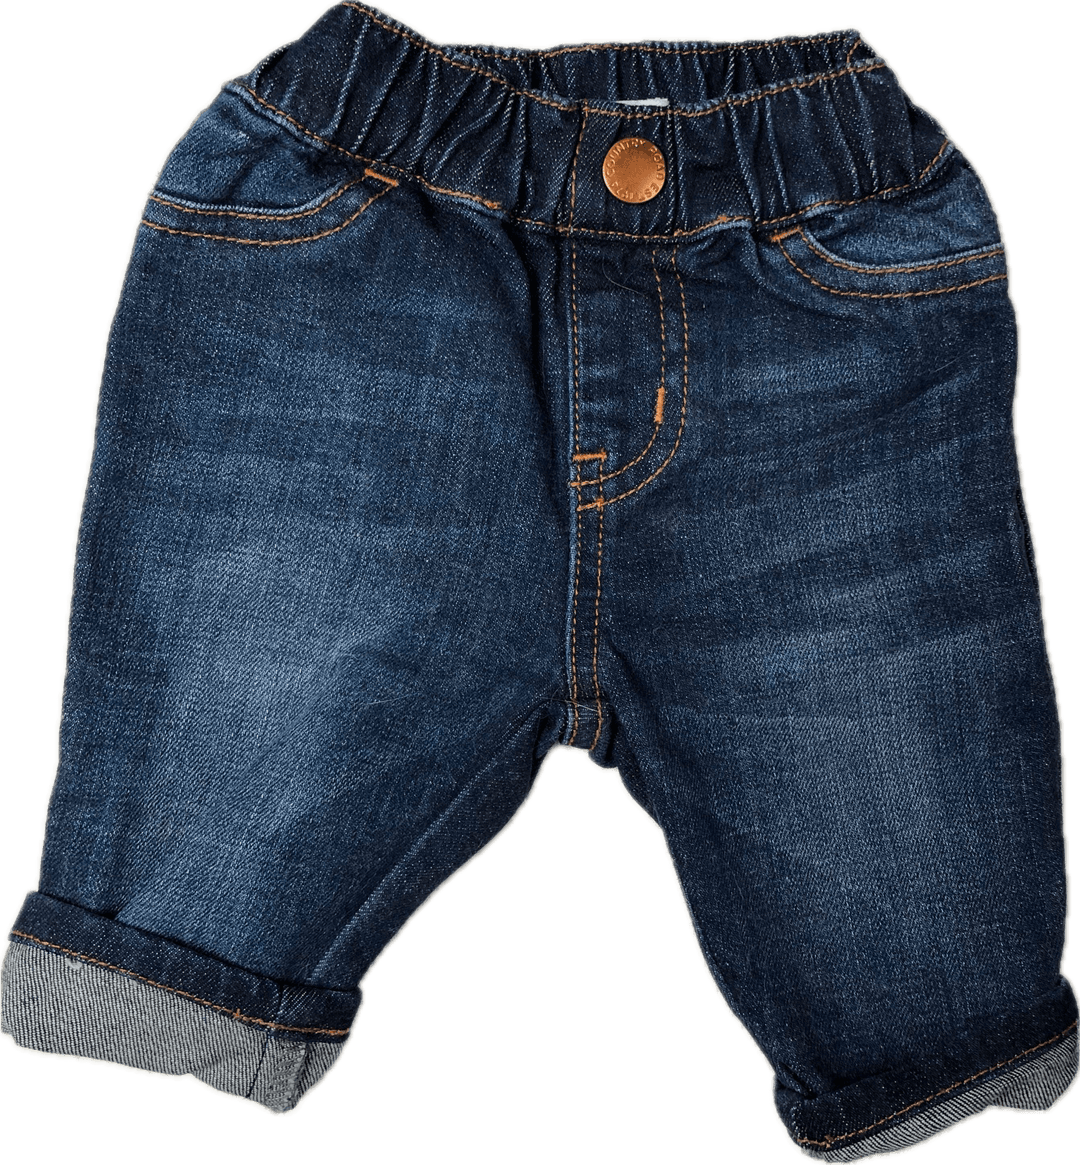 Country Road Denim Baby Jeans -Size 00 - Jean Pool